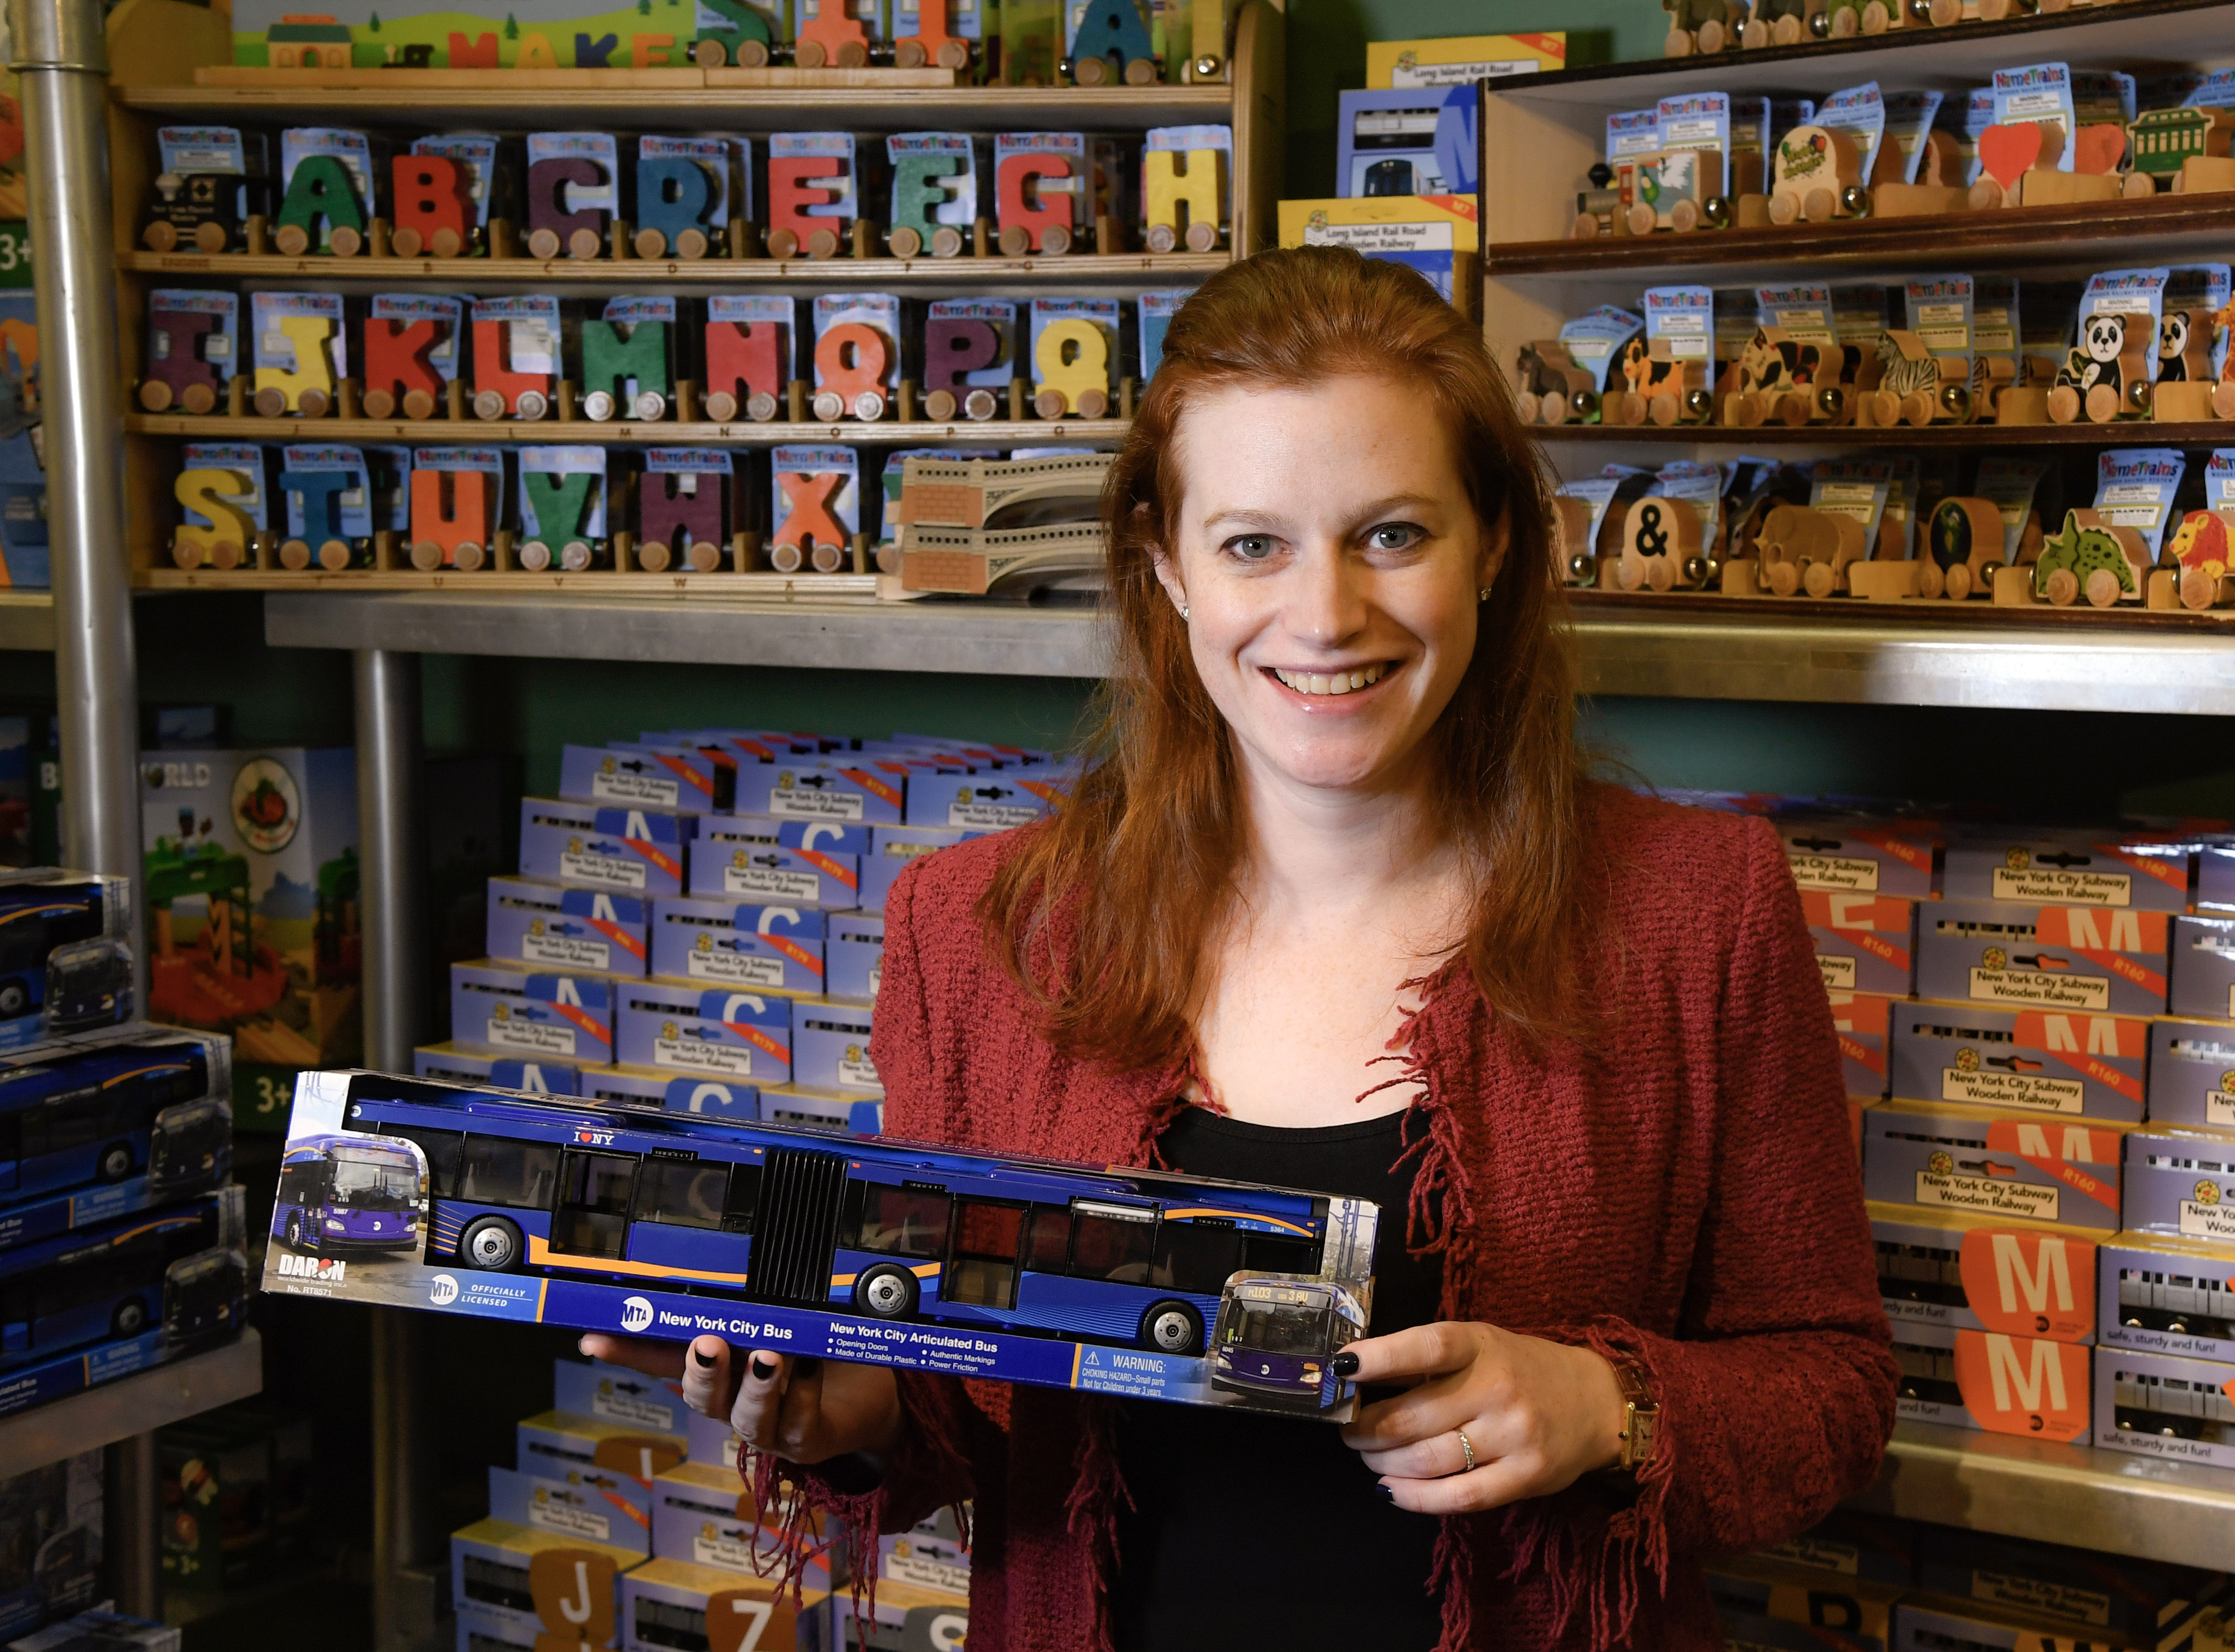 New York Transit Museum - Holiday Gift Guide, with Chief Customer Officer Sarah Meyer at the New York Transit Museum gift shop